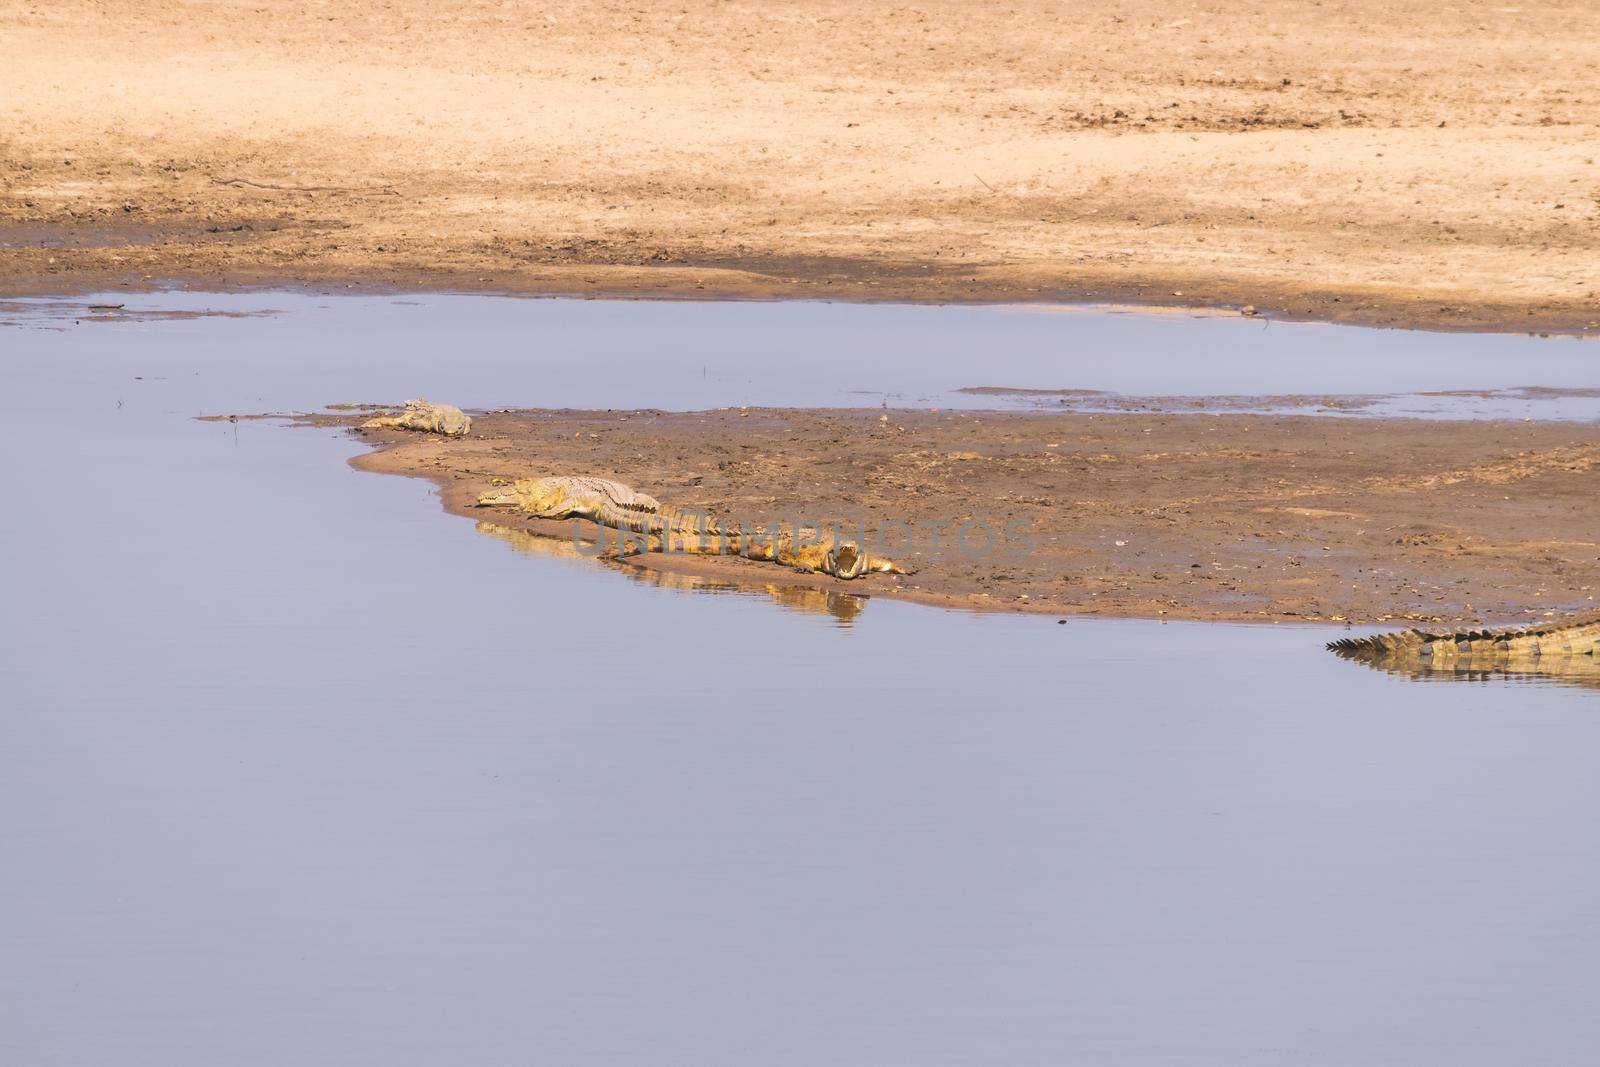 Amazing view of a group of crocodiles resting on the sandy banks of an African river by silentstock639